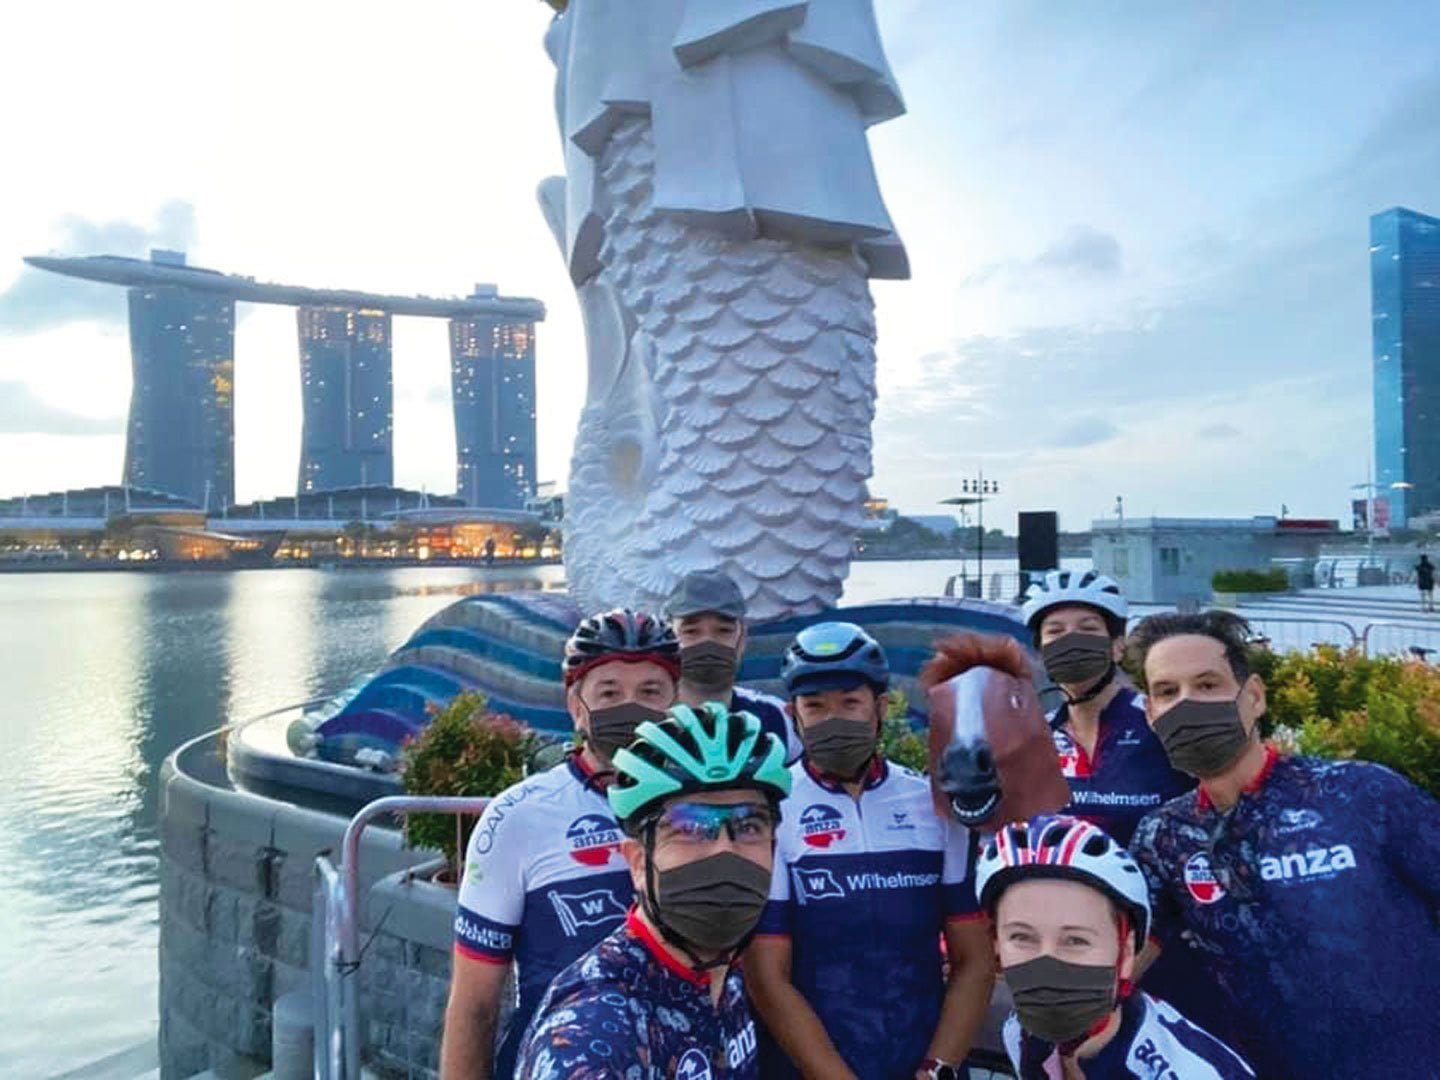 cyclists at Merlion